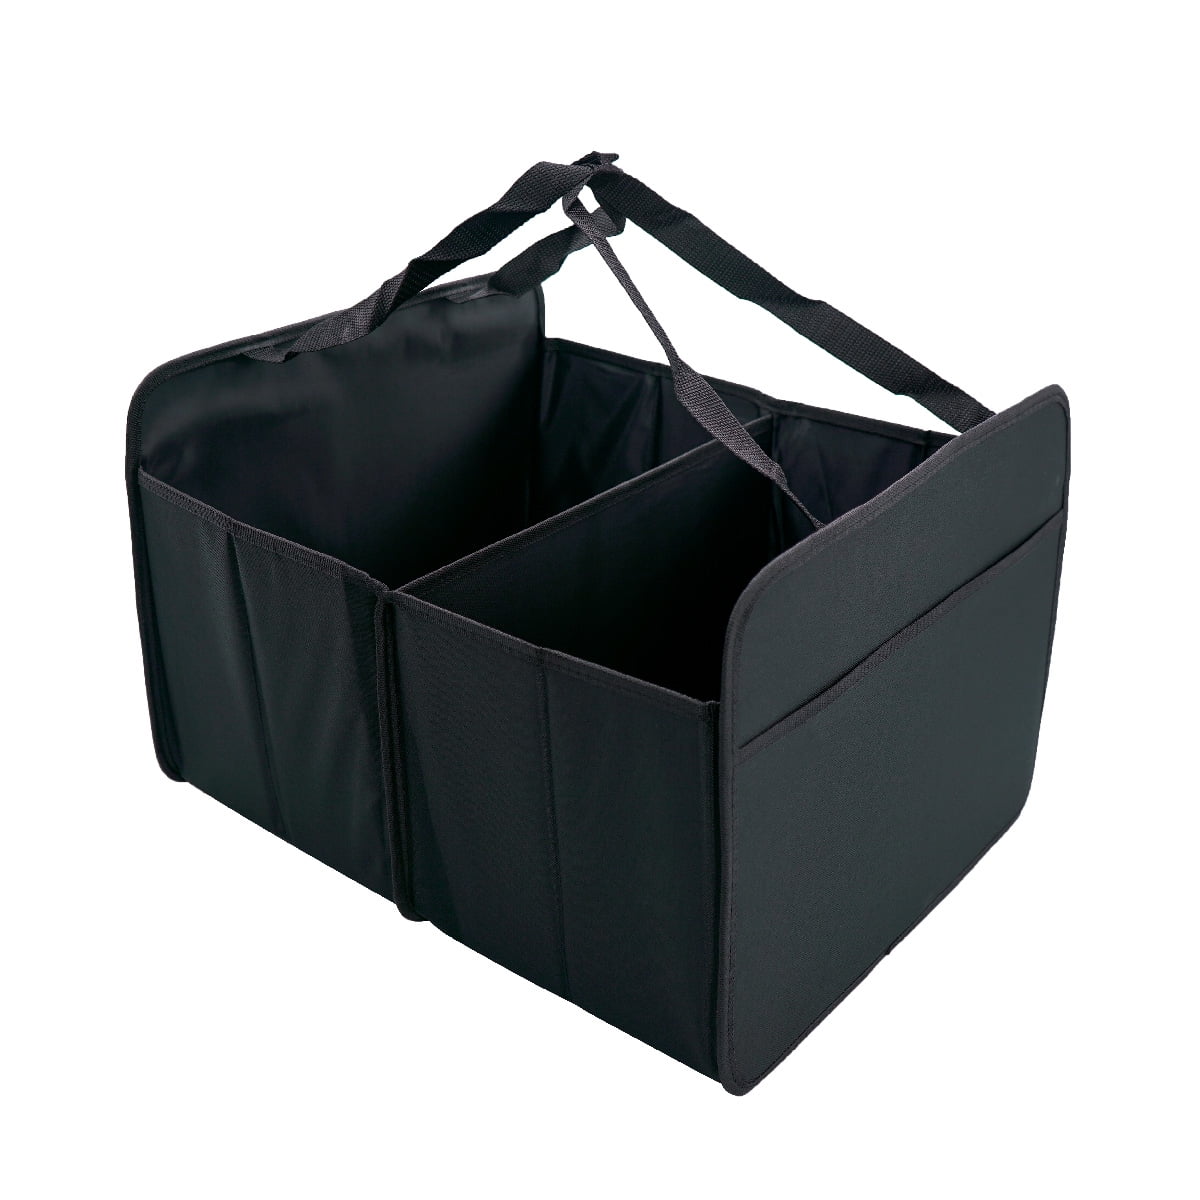 Auto Drive Black Hard-Sided Collapsible Trunk Organizer 18.5"x16.54"x9.96" for Truck and SUV